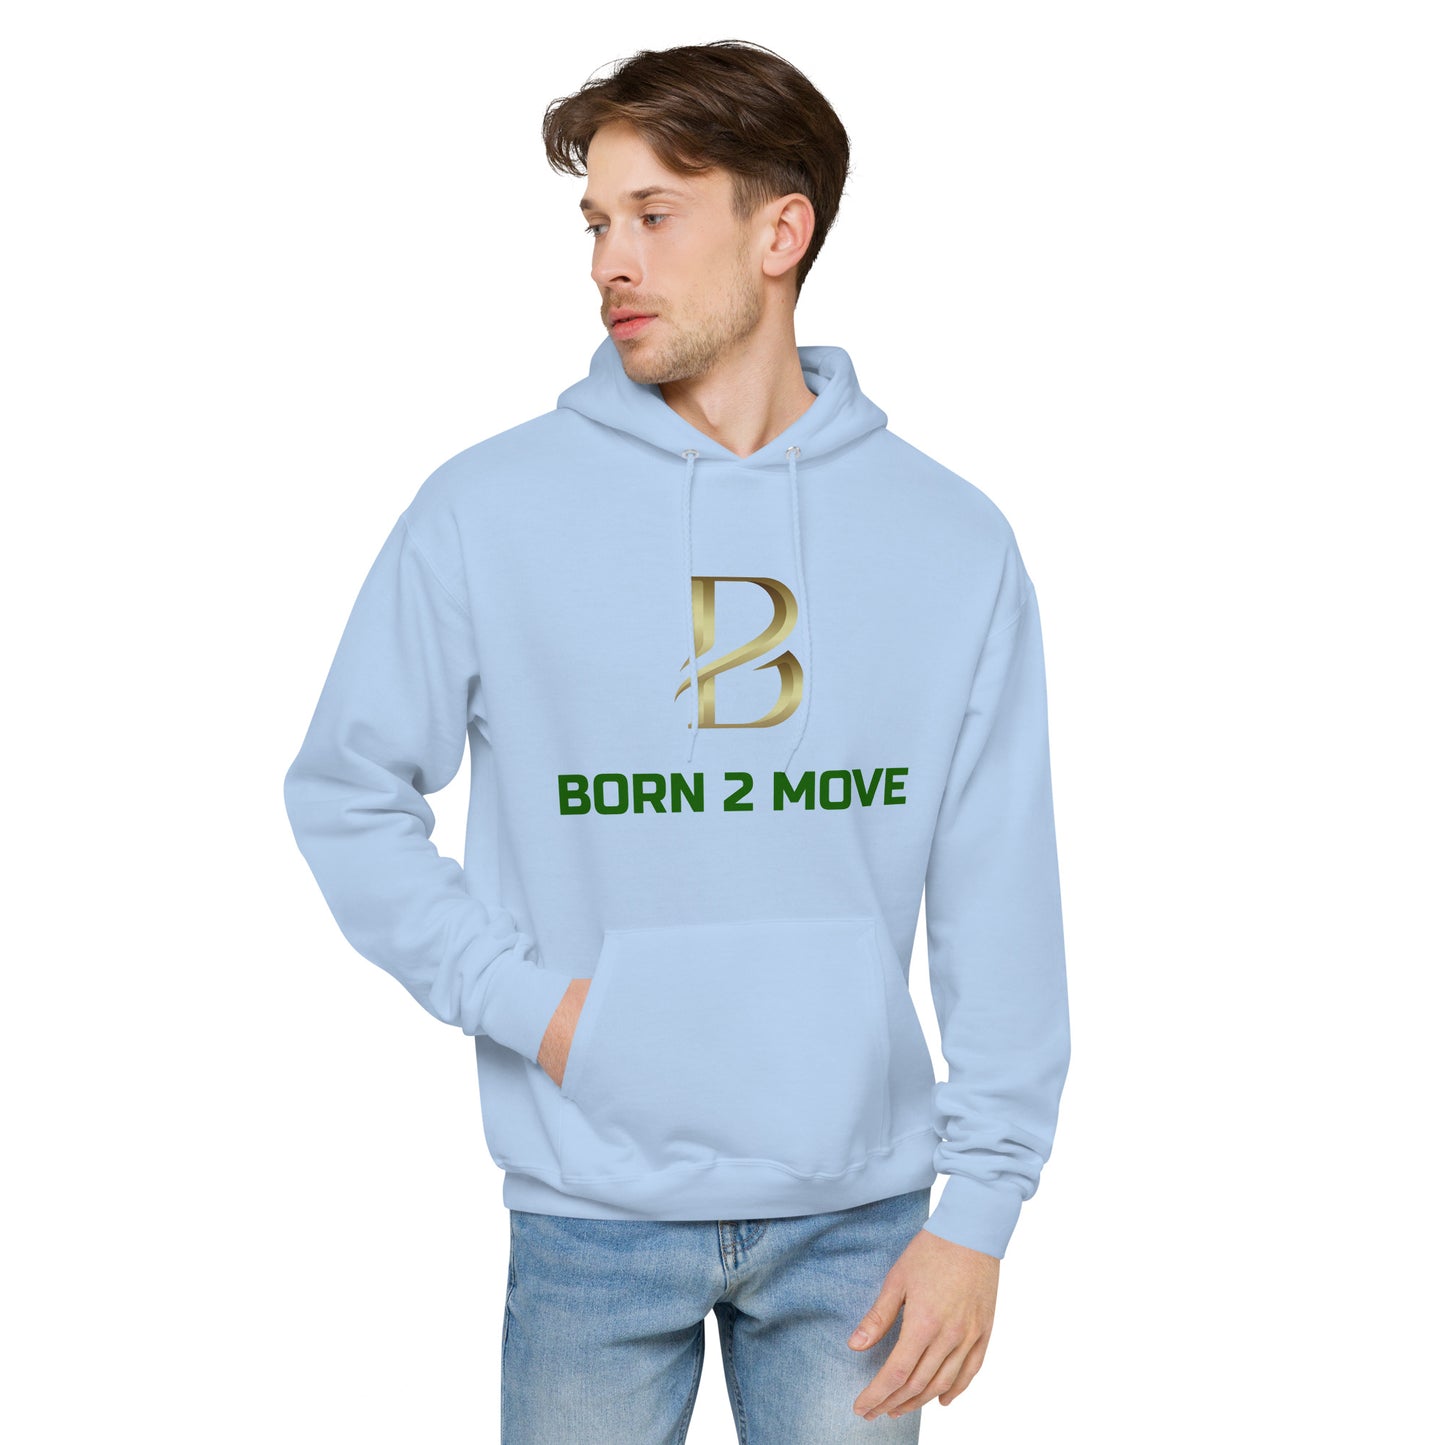 Green and Gold Logo "Born 2 Move" Fitted Hoodie